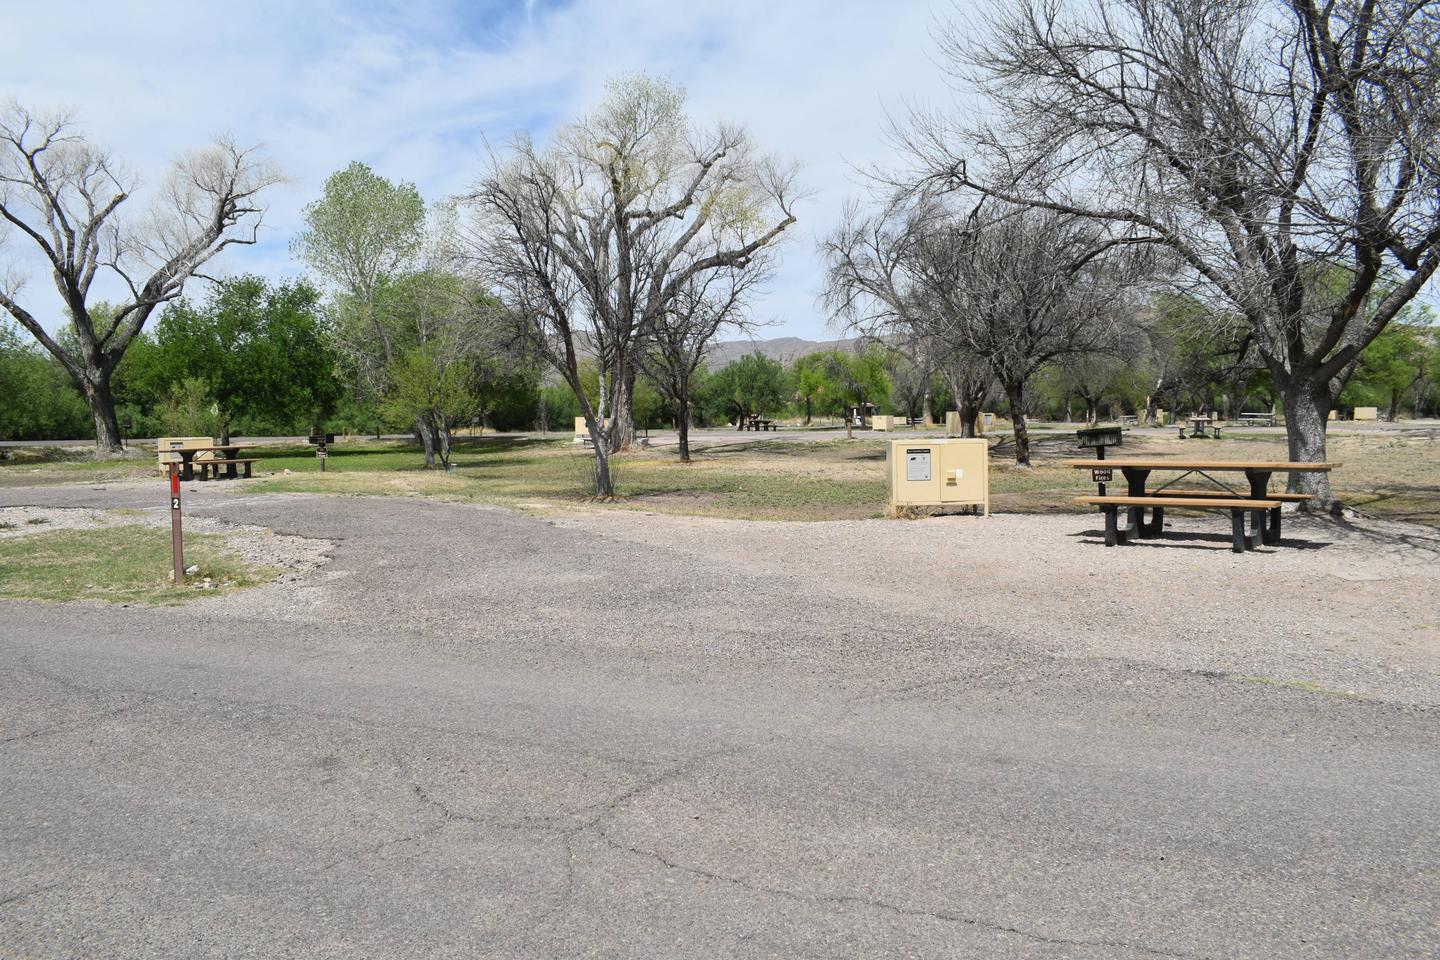 The paved, pull through parking space connects to the main campground road. Several cottonwood trees that have lost their leaves for the winter are shown in a field just beyond the camp site. The vehicle access to Site 2